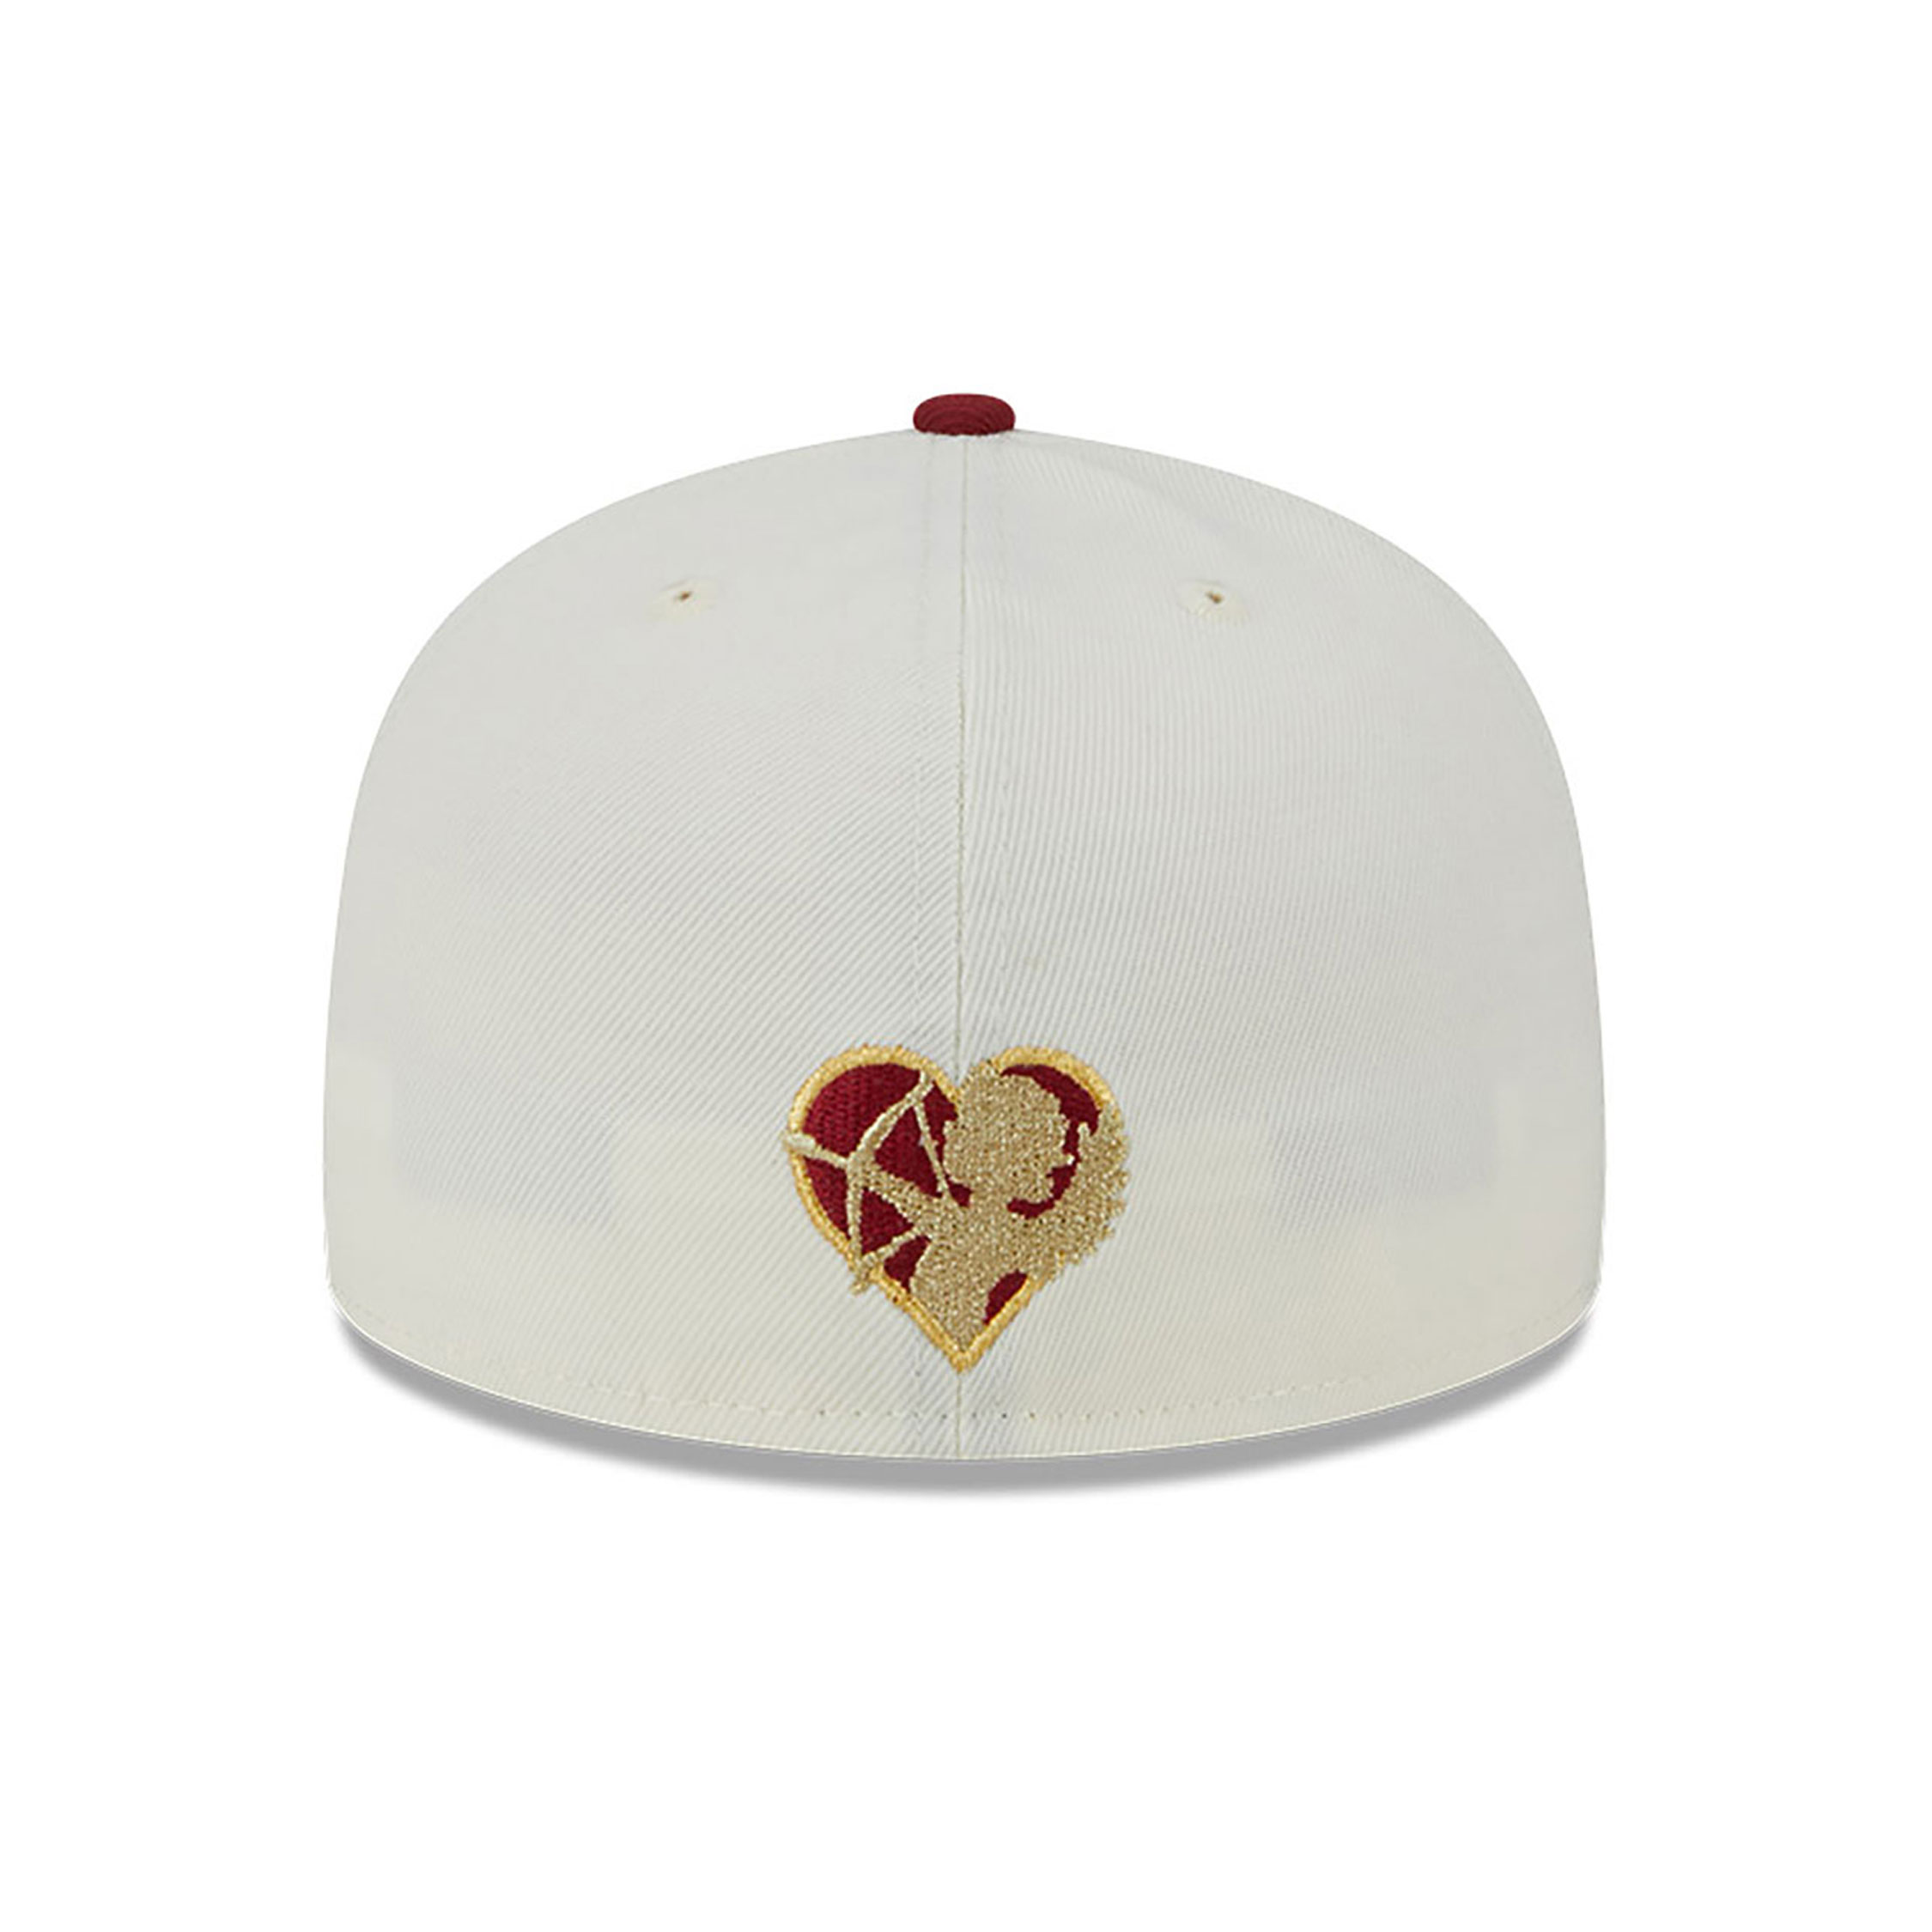 Miami Marlins Be Mine White 59FIFTY Fitted Cap